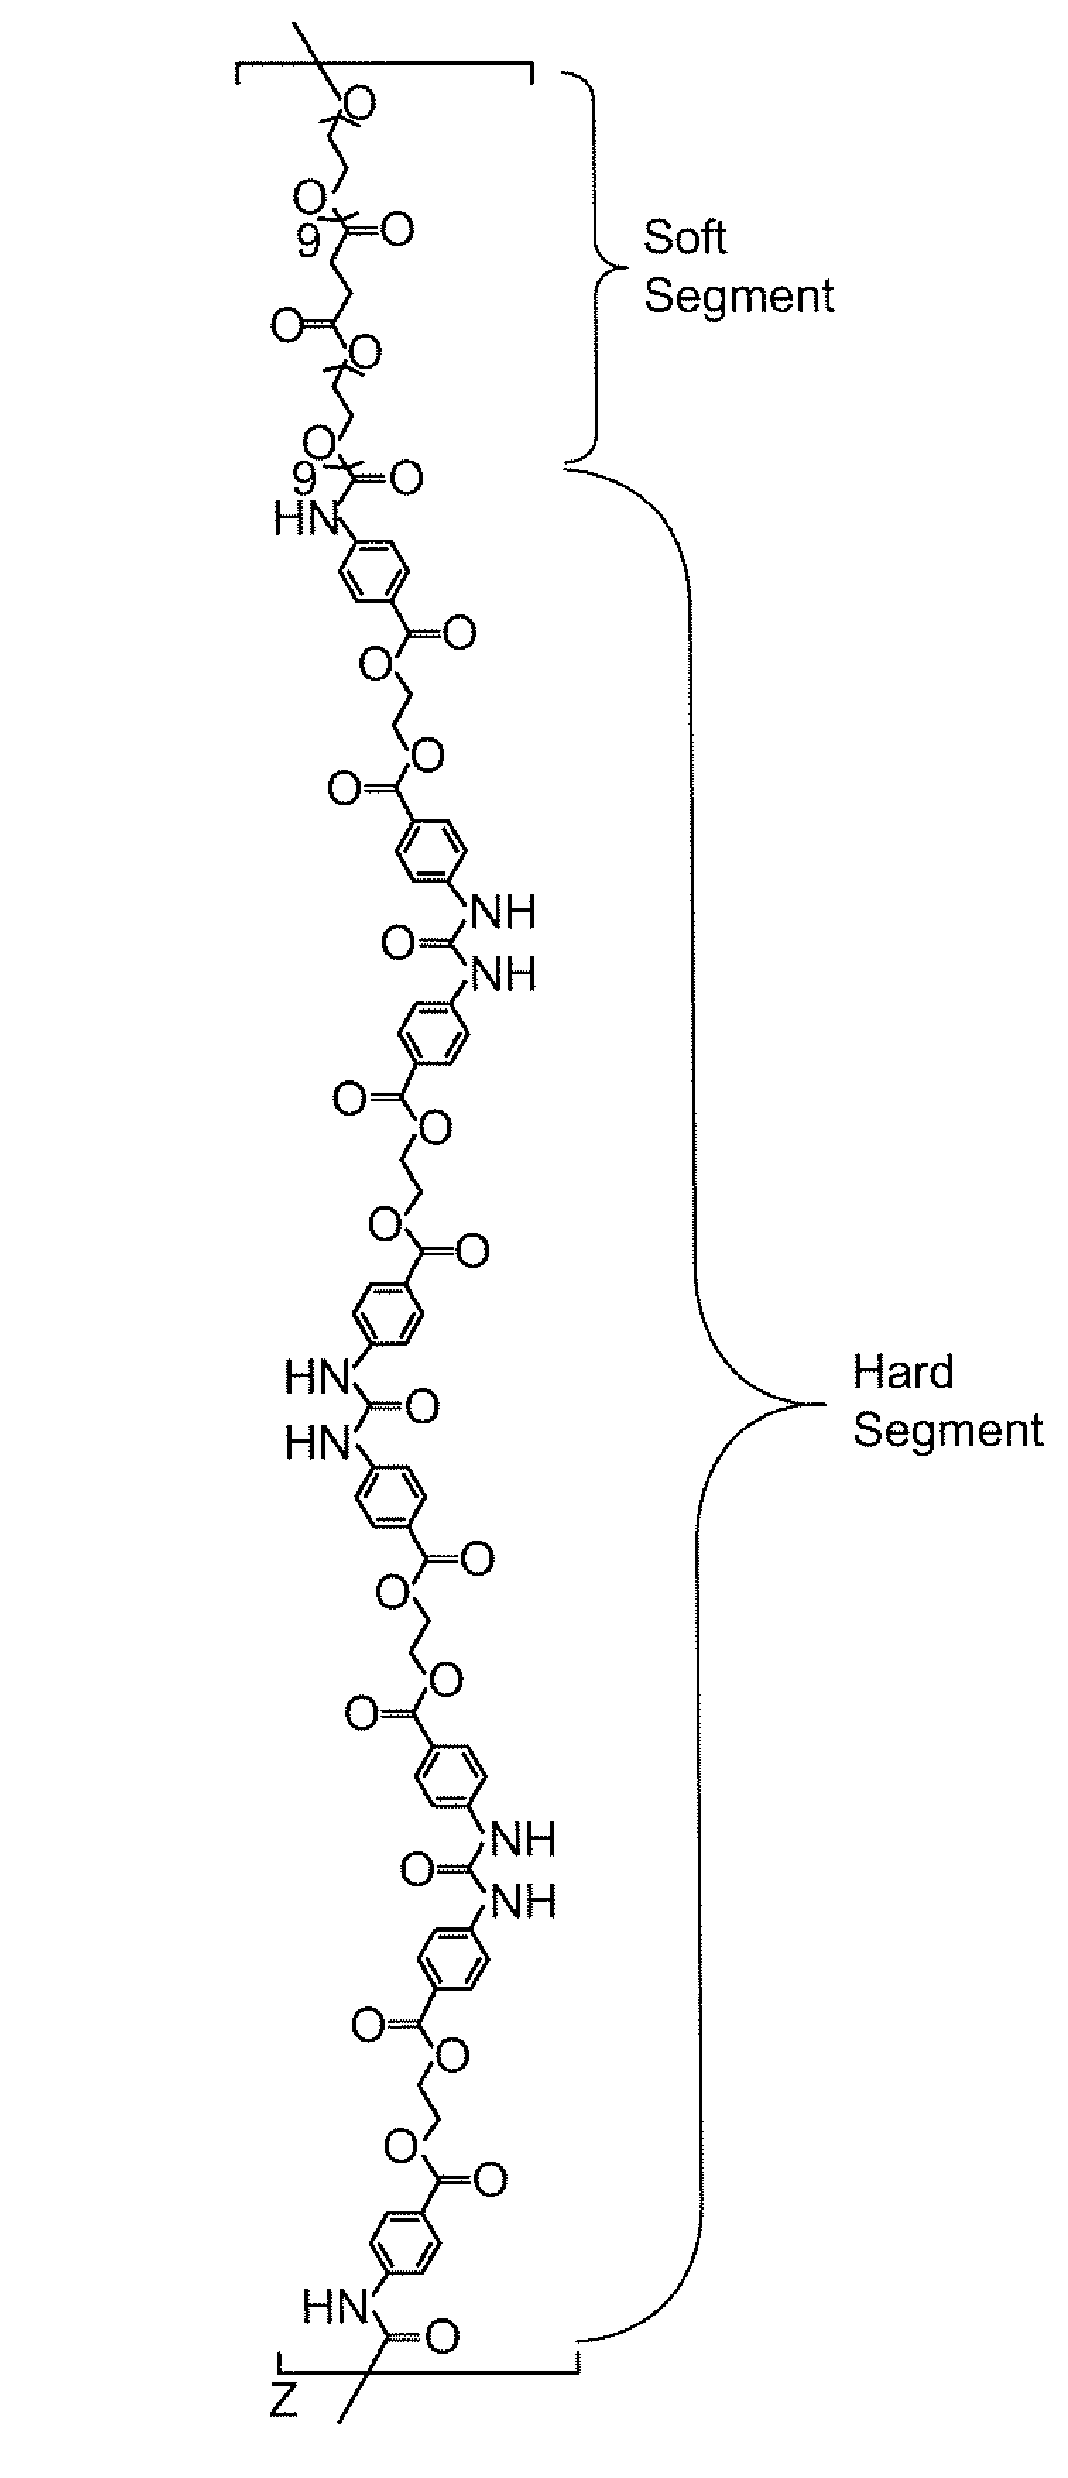 Medically acceptable formulation of a diisocyanate terminated macromer for use as an internal adhesive or sealant